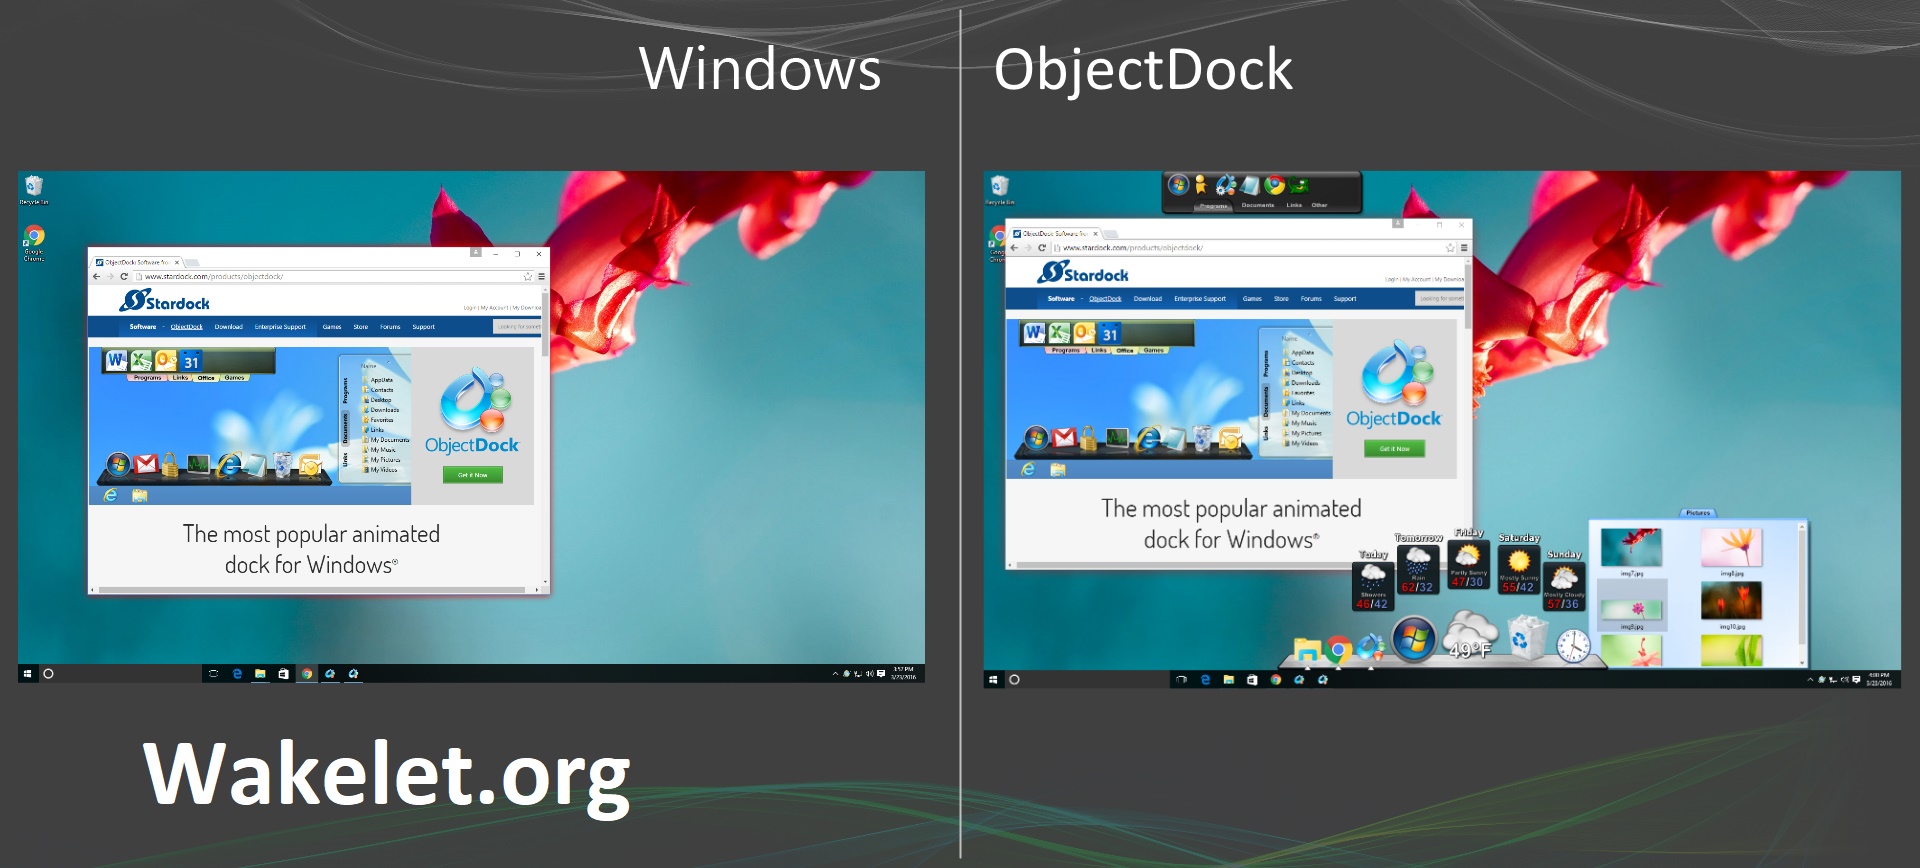 ObjectDock 2.22.0.865 Crack + Product Key Free Download 2022